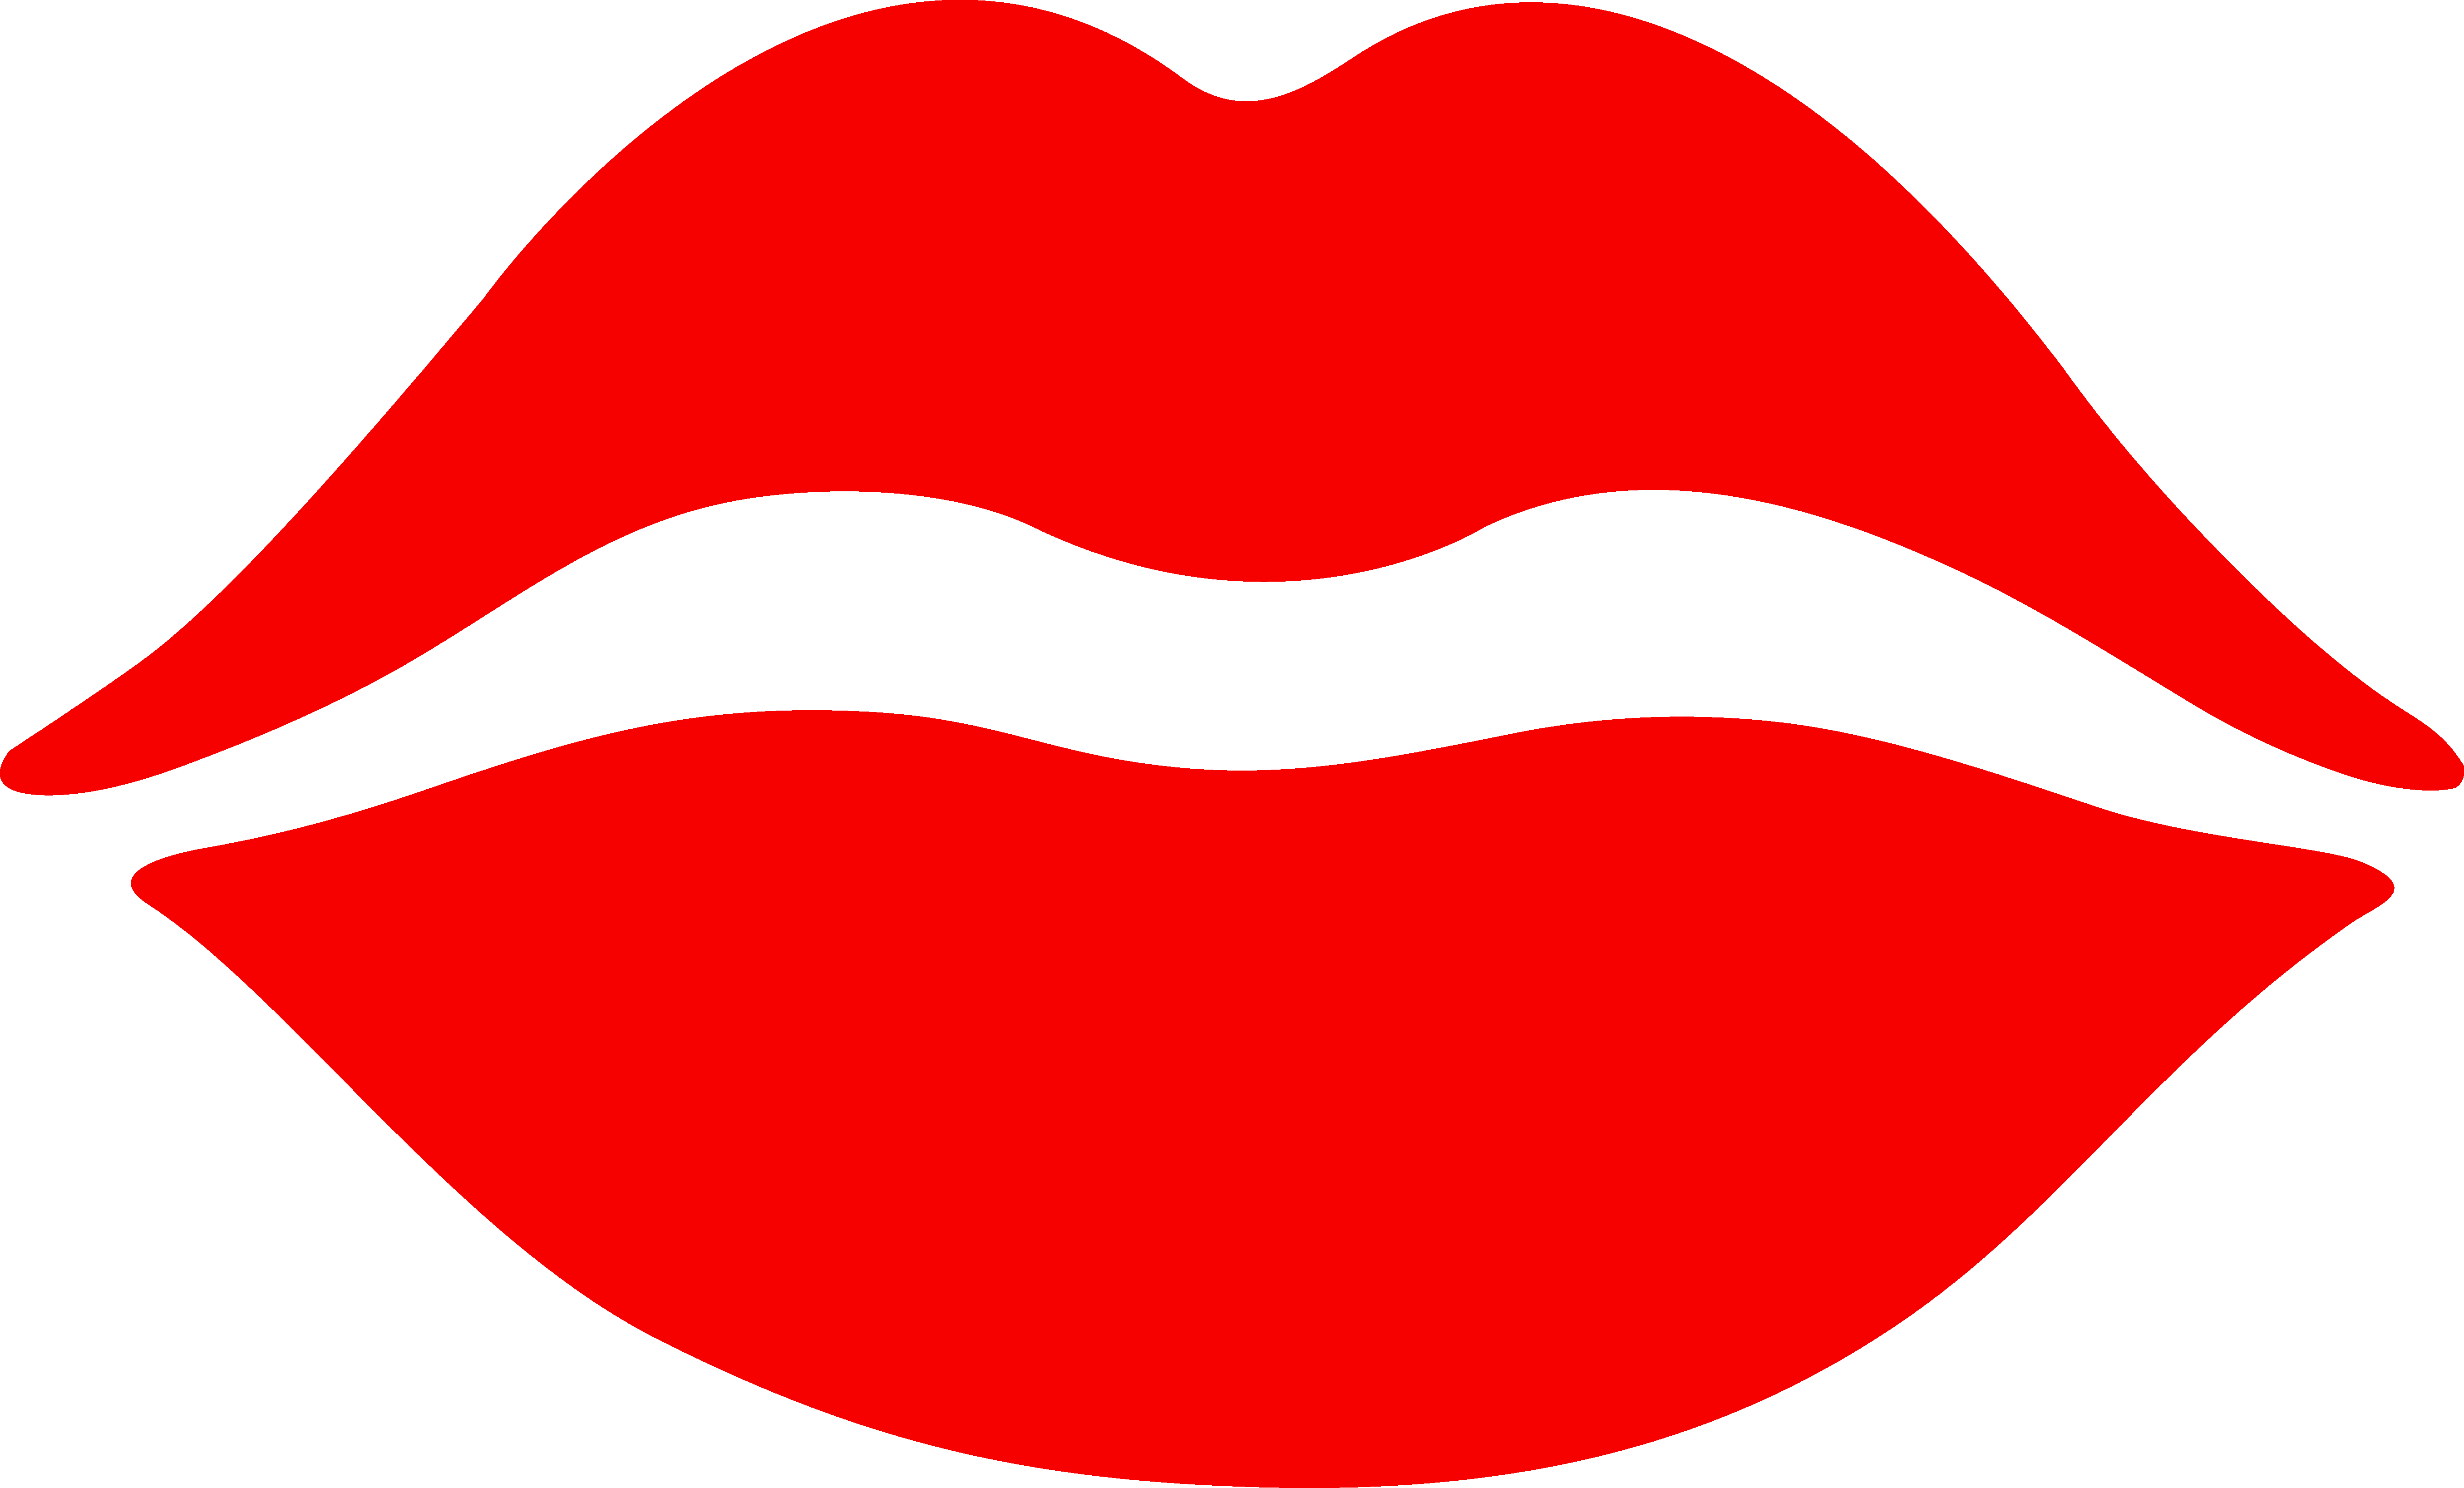 Simple red design free. Lips vector png